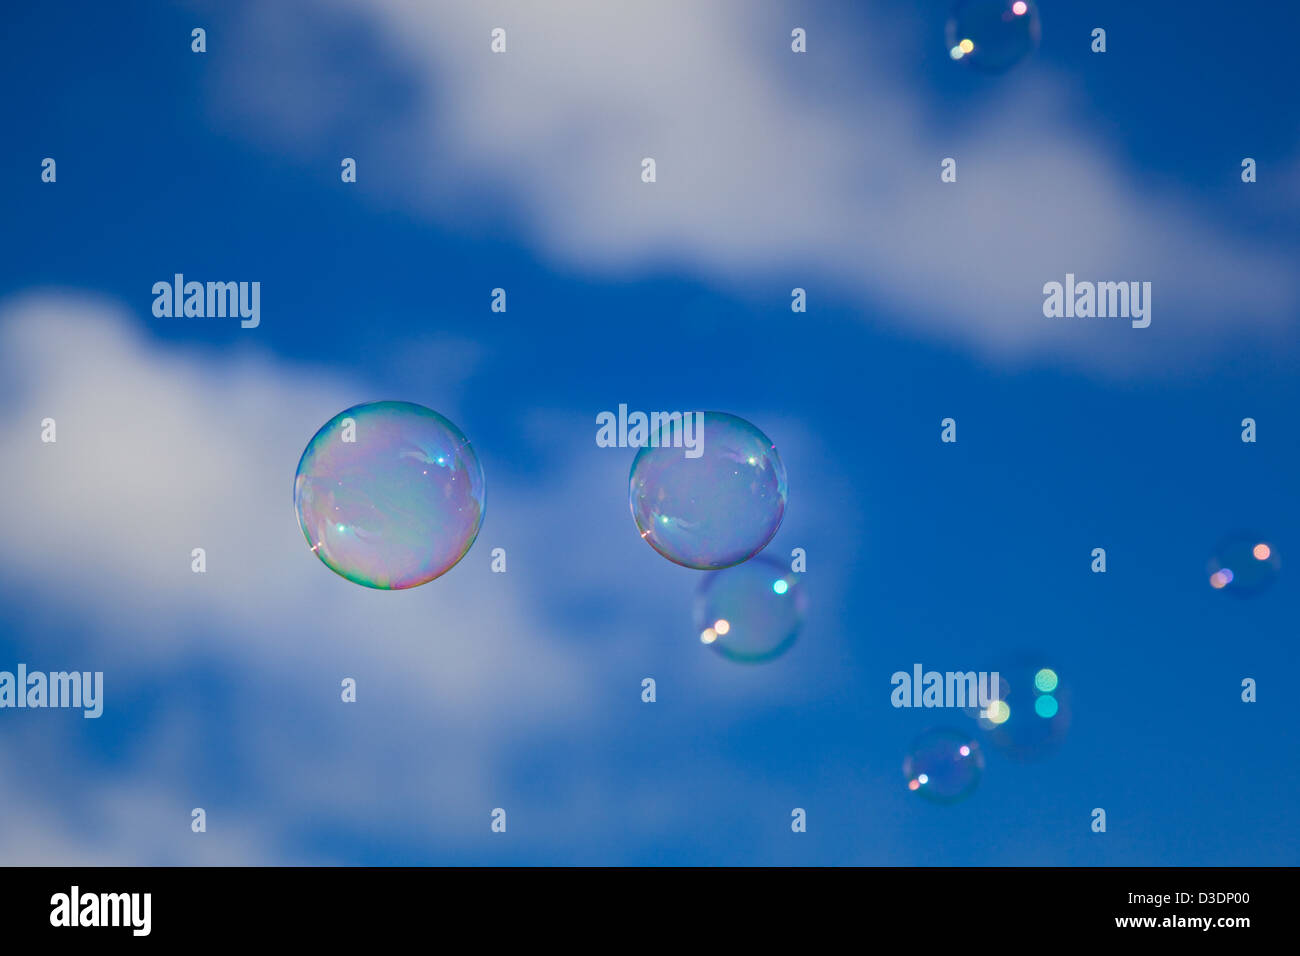 Several bubbles with a cloudy blue sky as background Stock Photo